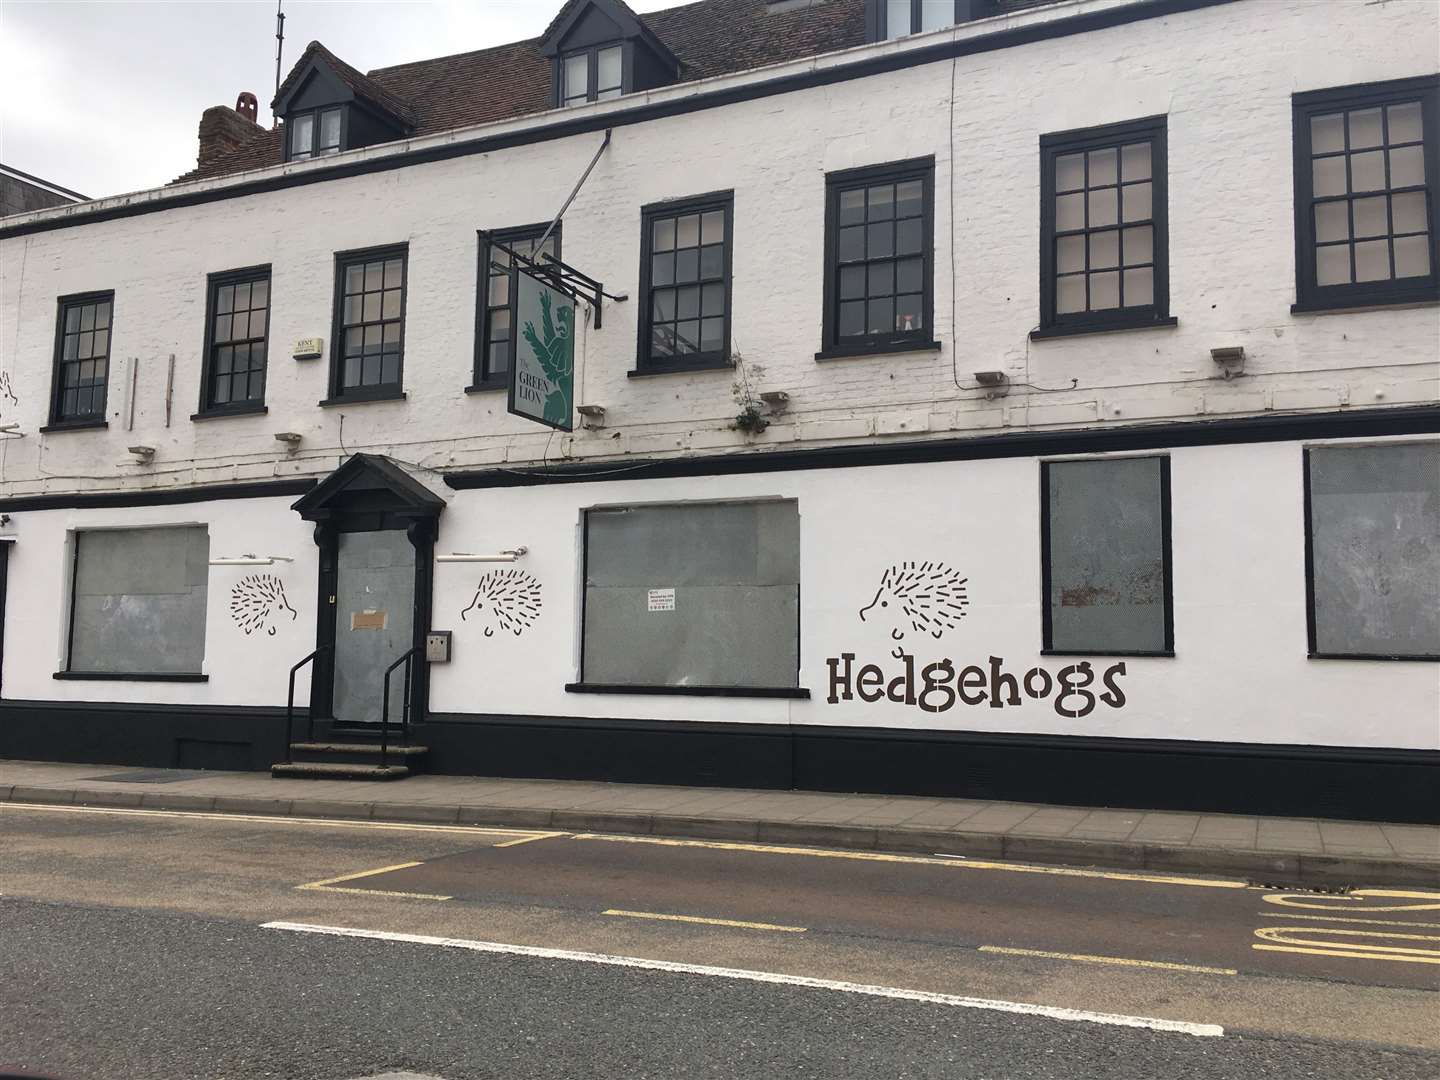 The Hedgehogs nursery wants to move into the former Green Lion pub in Rainham